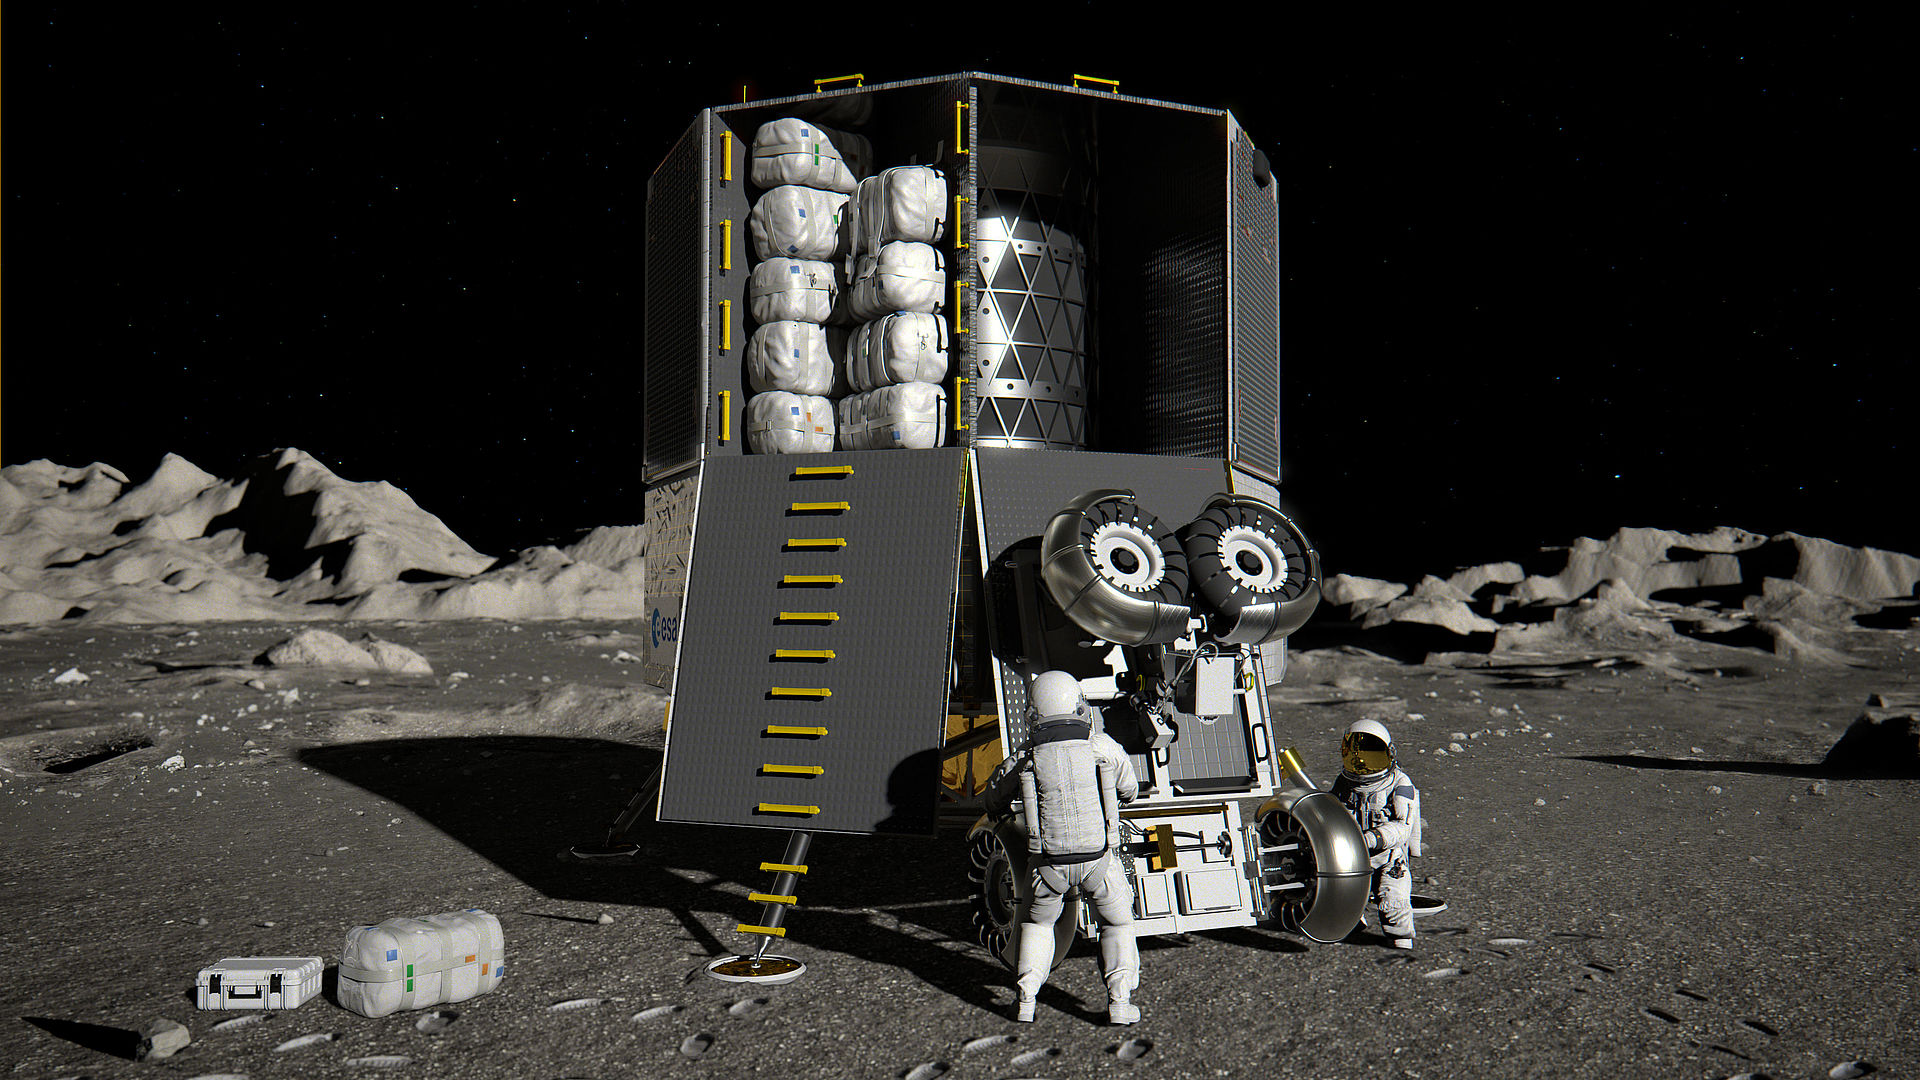 A lander unloading cargo on the moon's surface. 